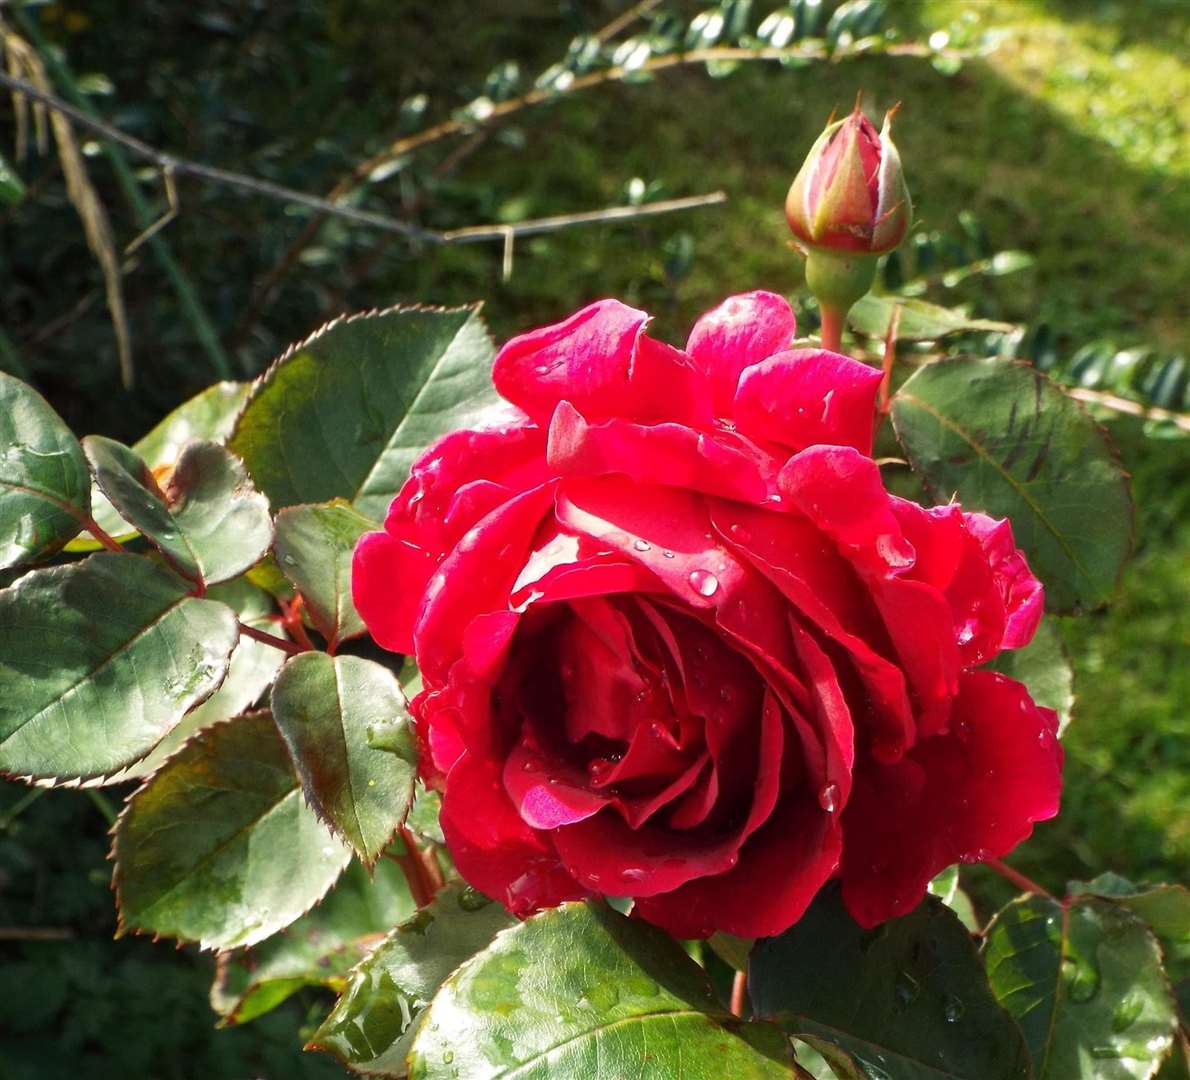 A lovely red rose, one of Donna Shearer's entries in the single rose class. Picture: Donna Shearer